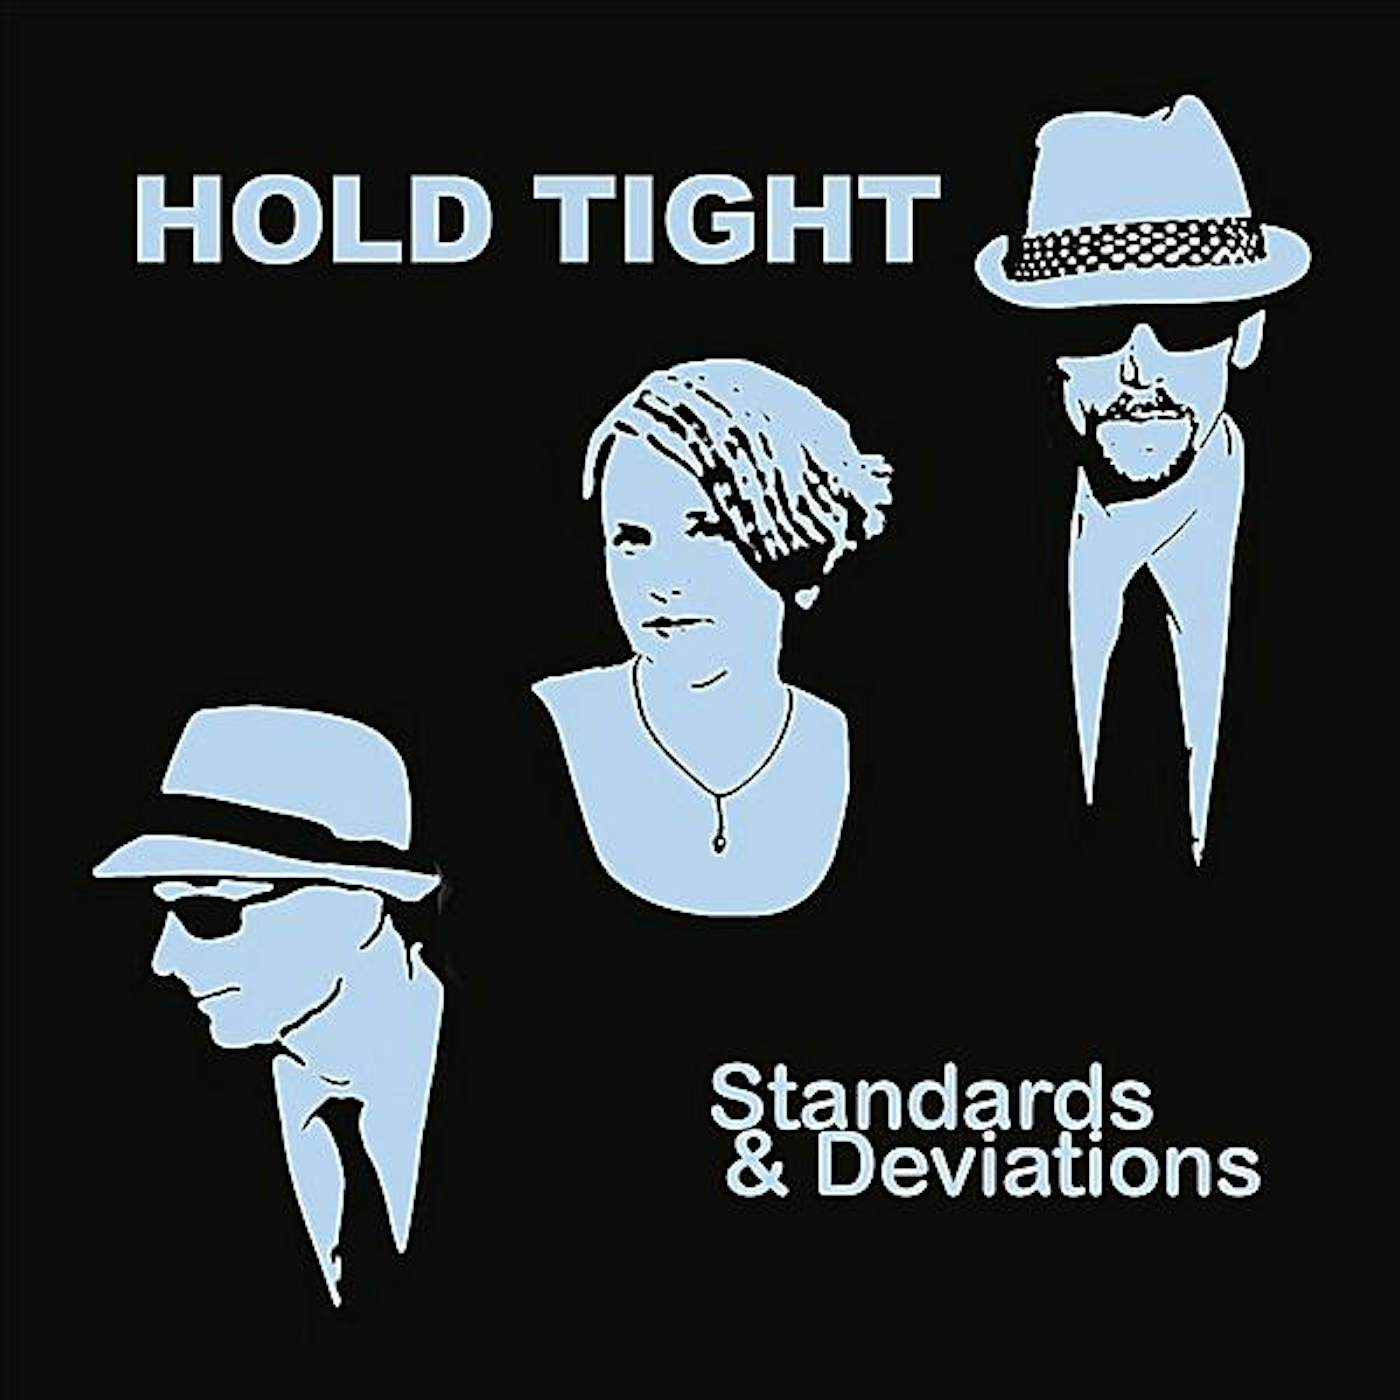 Hold Tight STANDARDS & DEVIATIONS CD